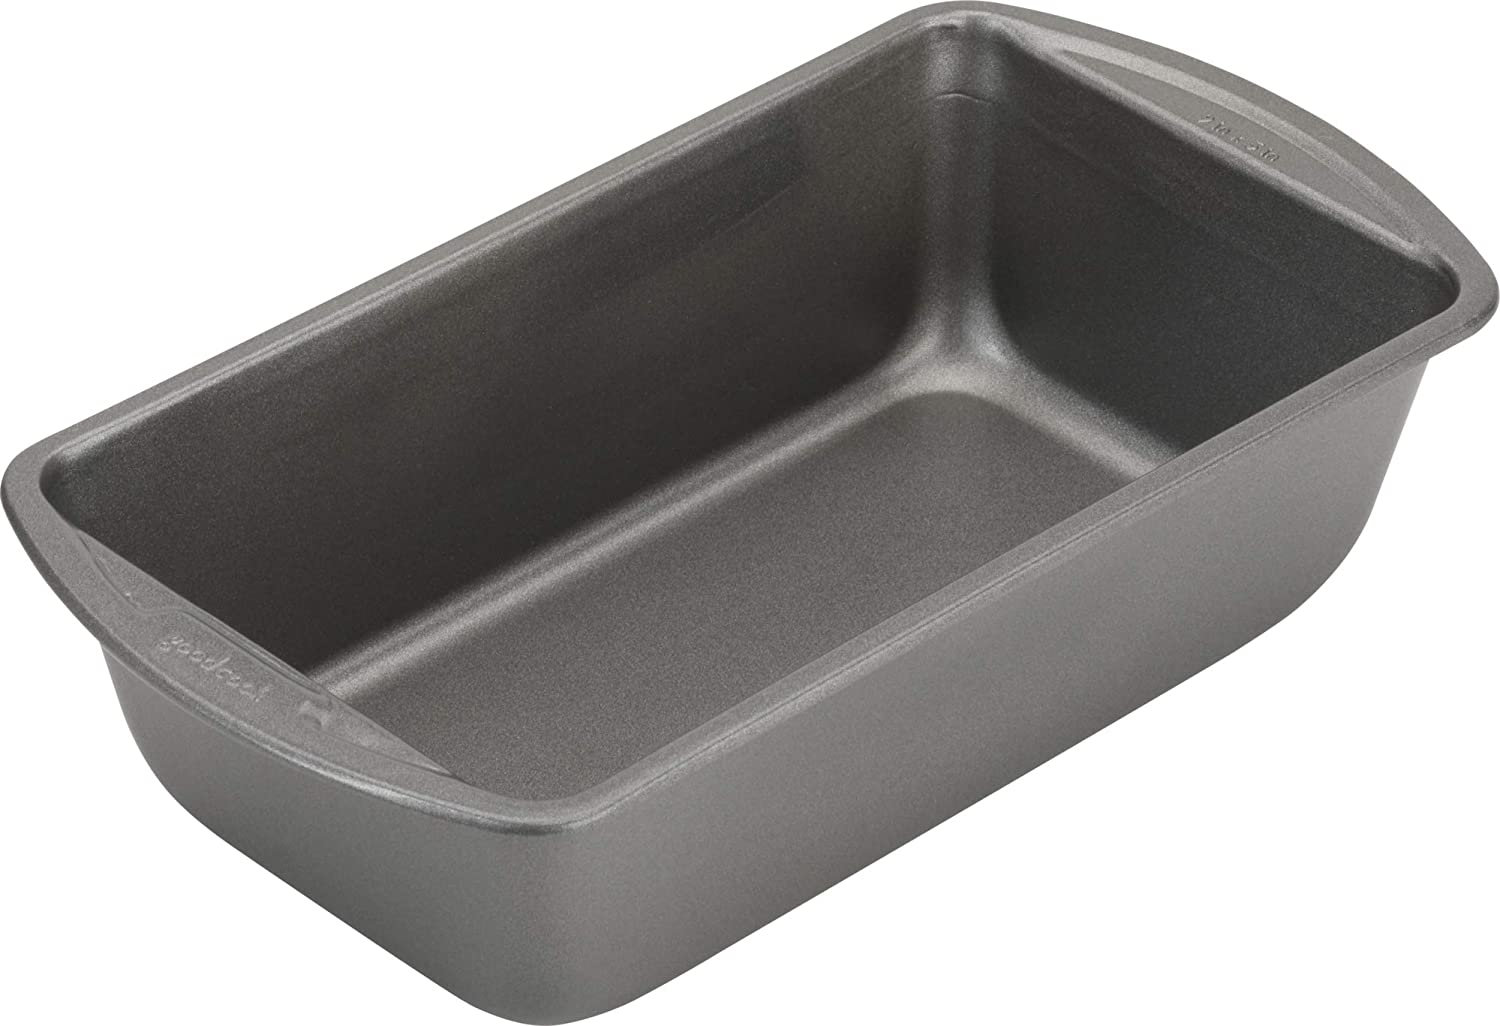 Anolon 9x5-in. Nonstick Advanced Bakeware Loaf Pan